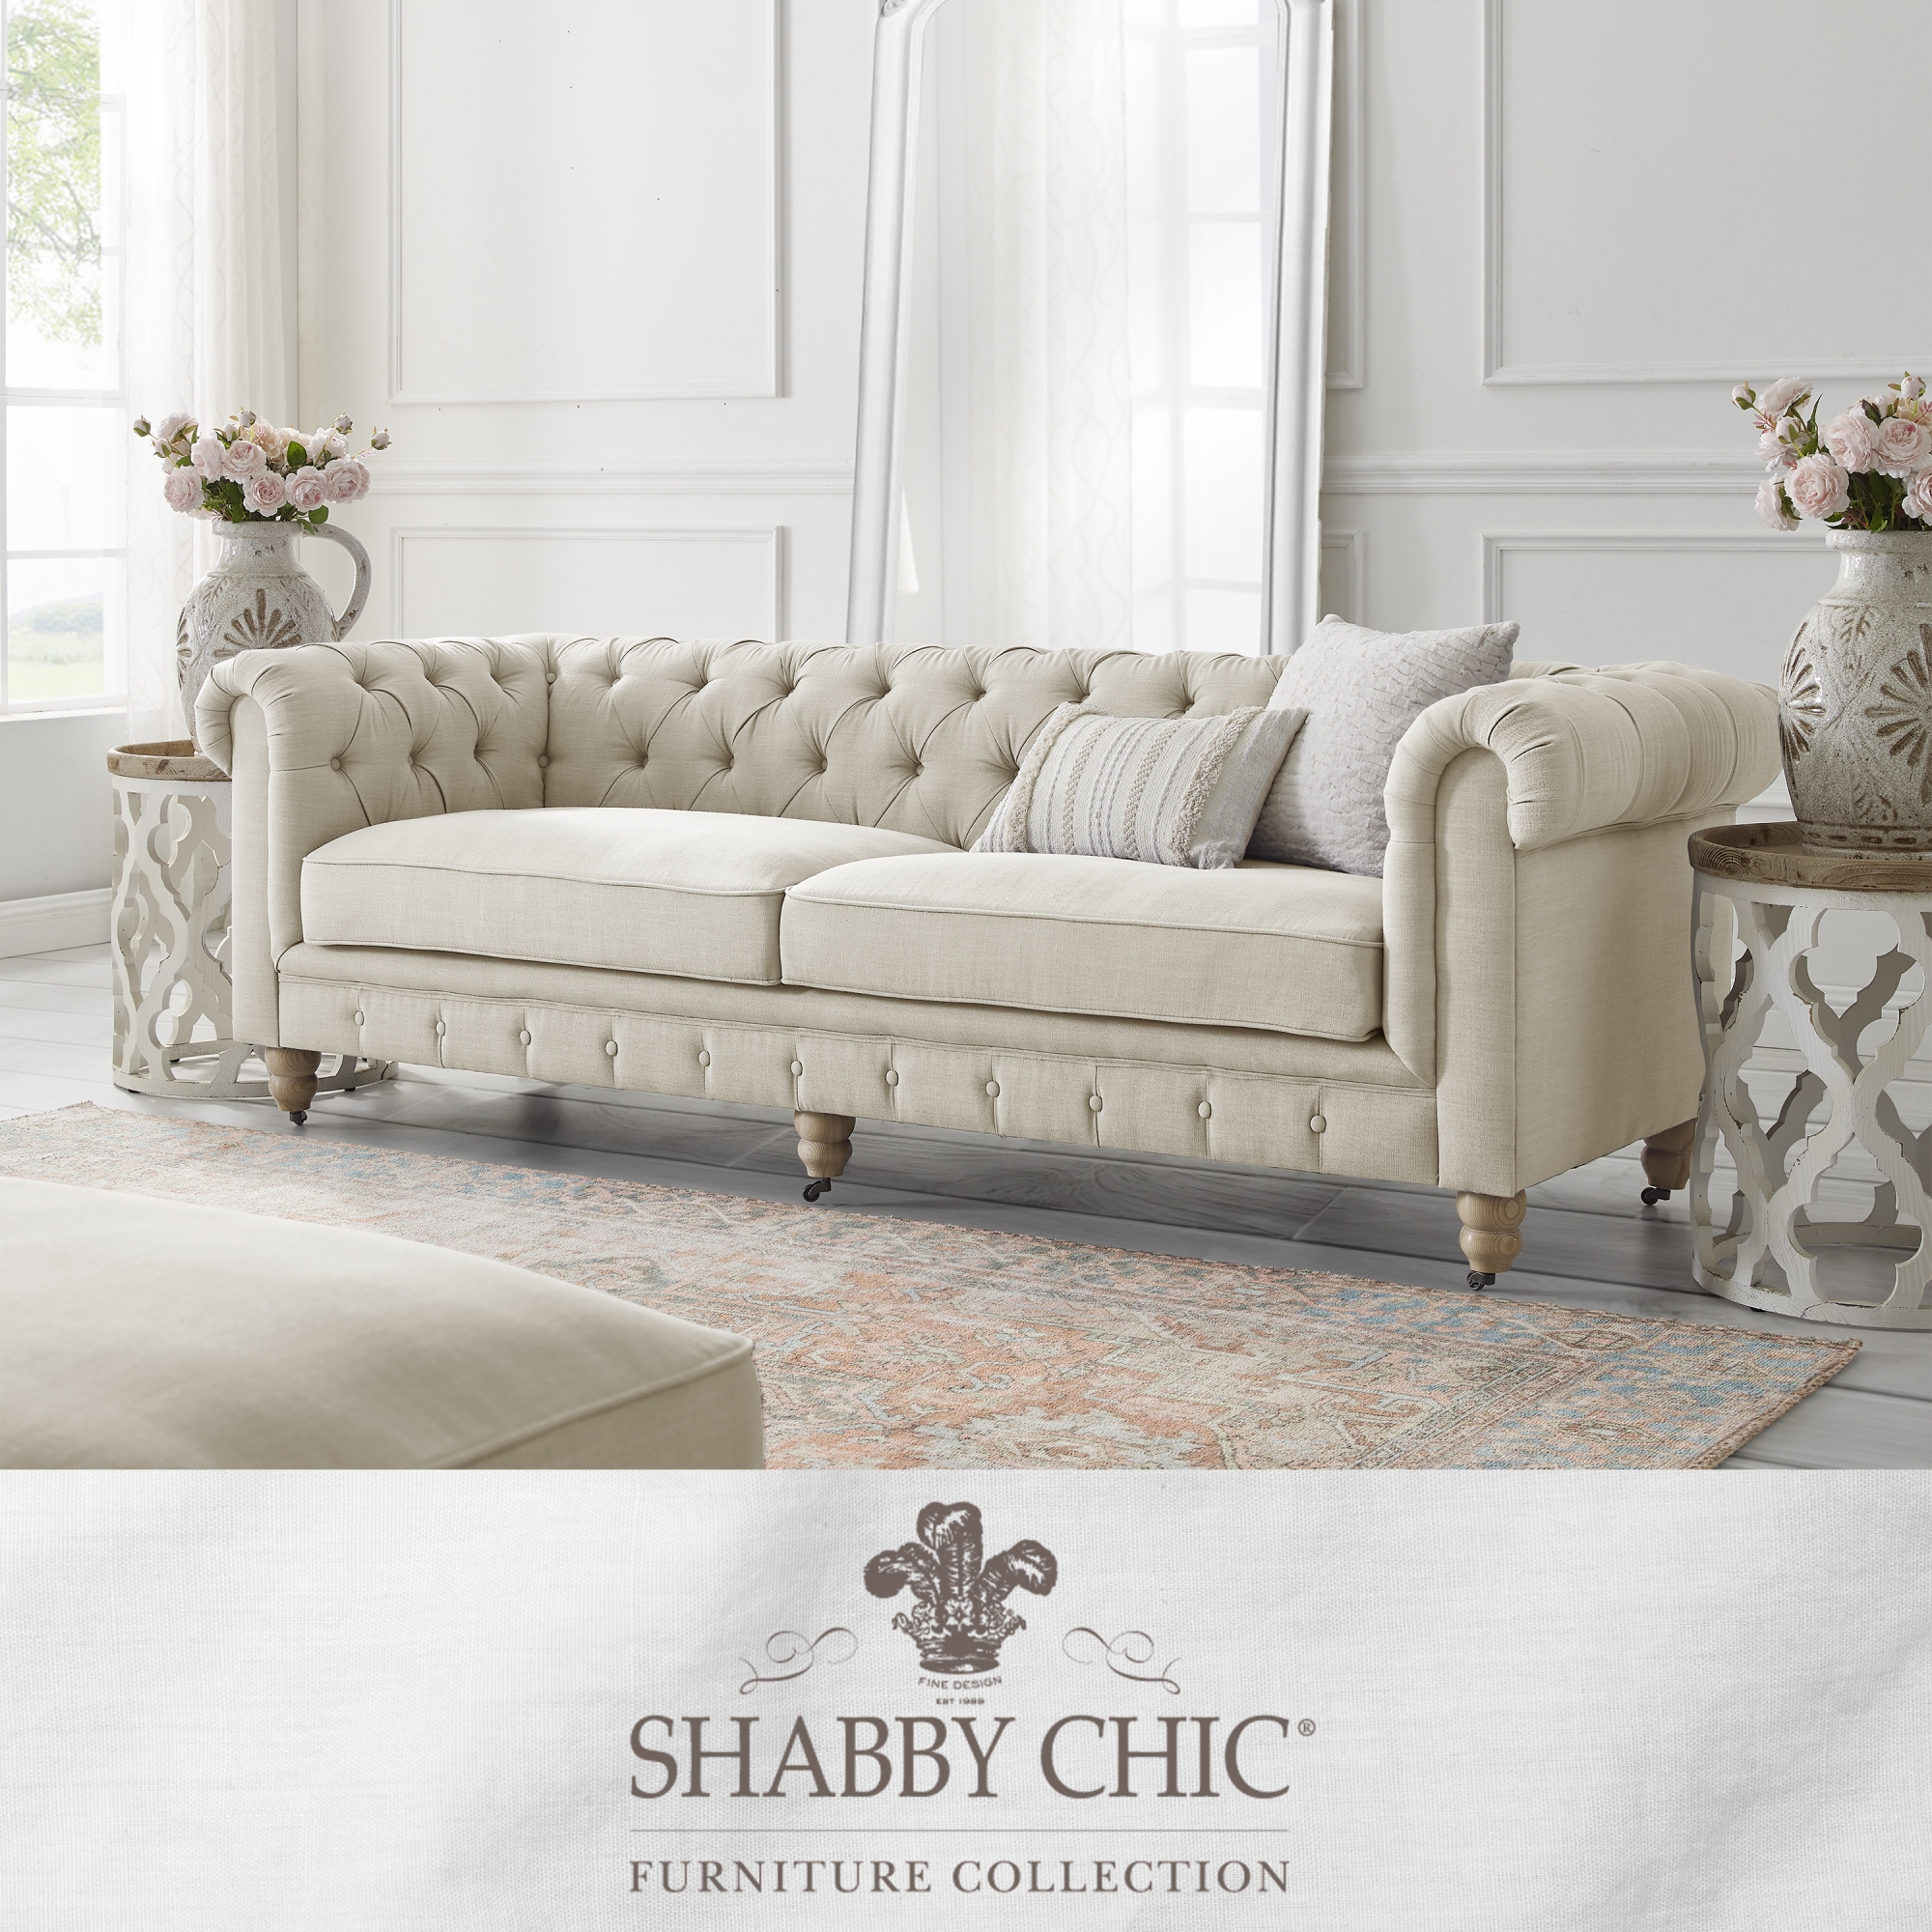 Shabby Chic Macey Chesterfield Sofa Button Tufted Rolled Arm, Sinuous Springs Round Bun Leg with Caster, Removable Seat Cushion